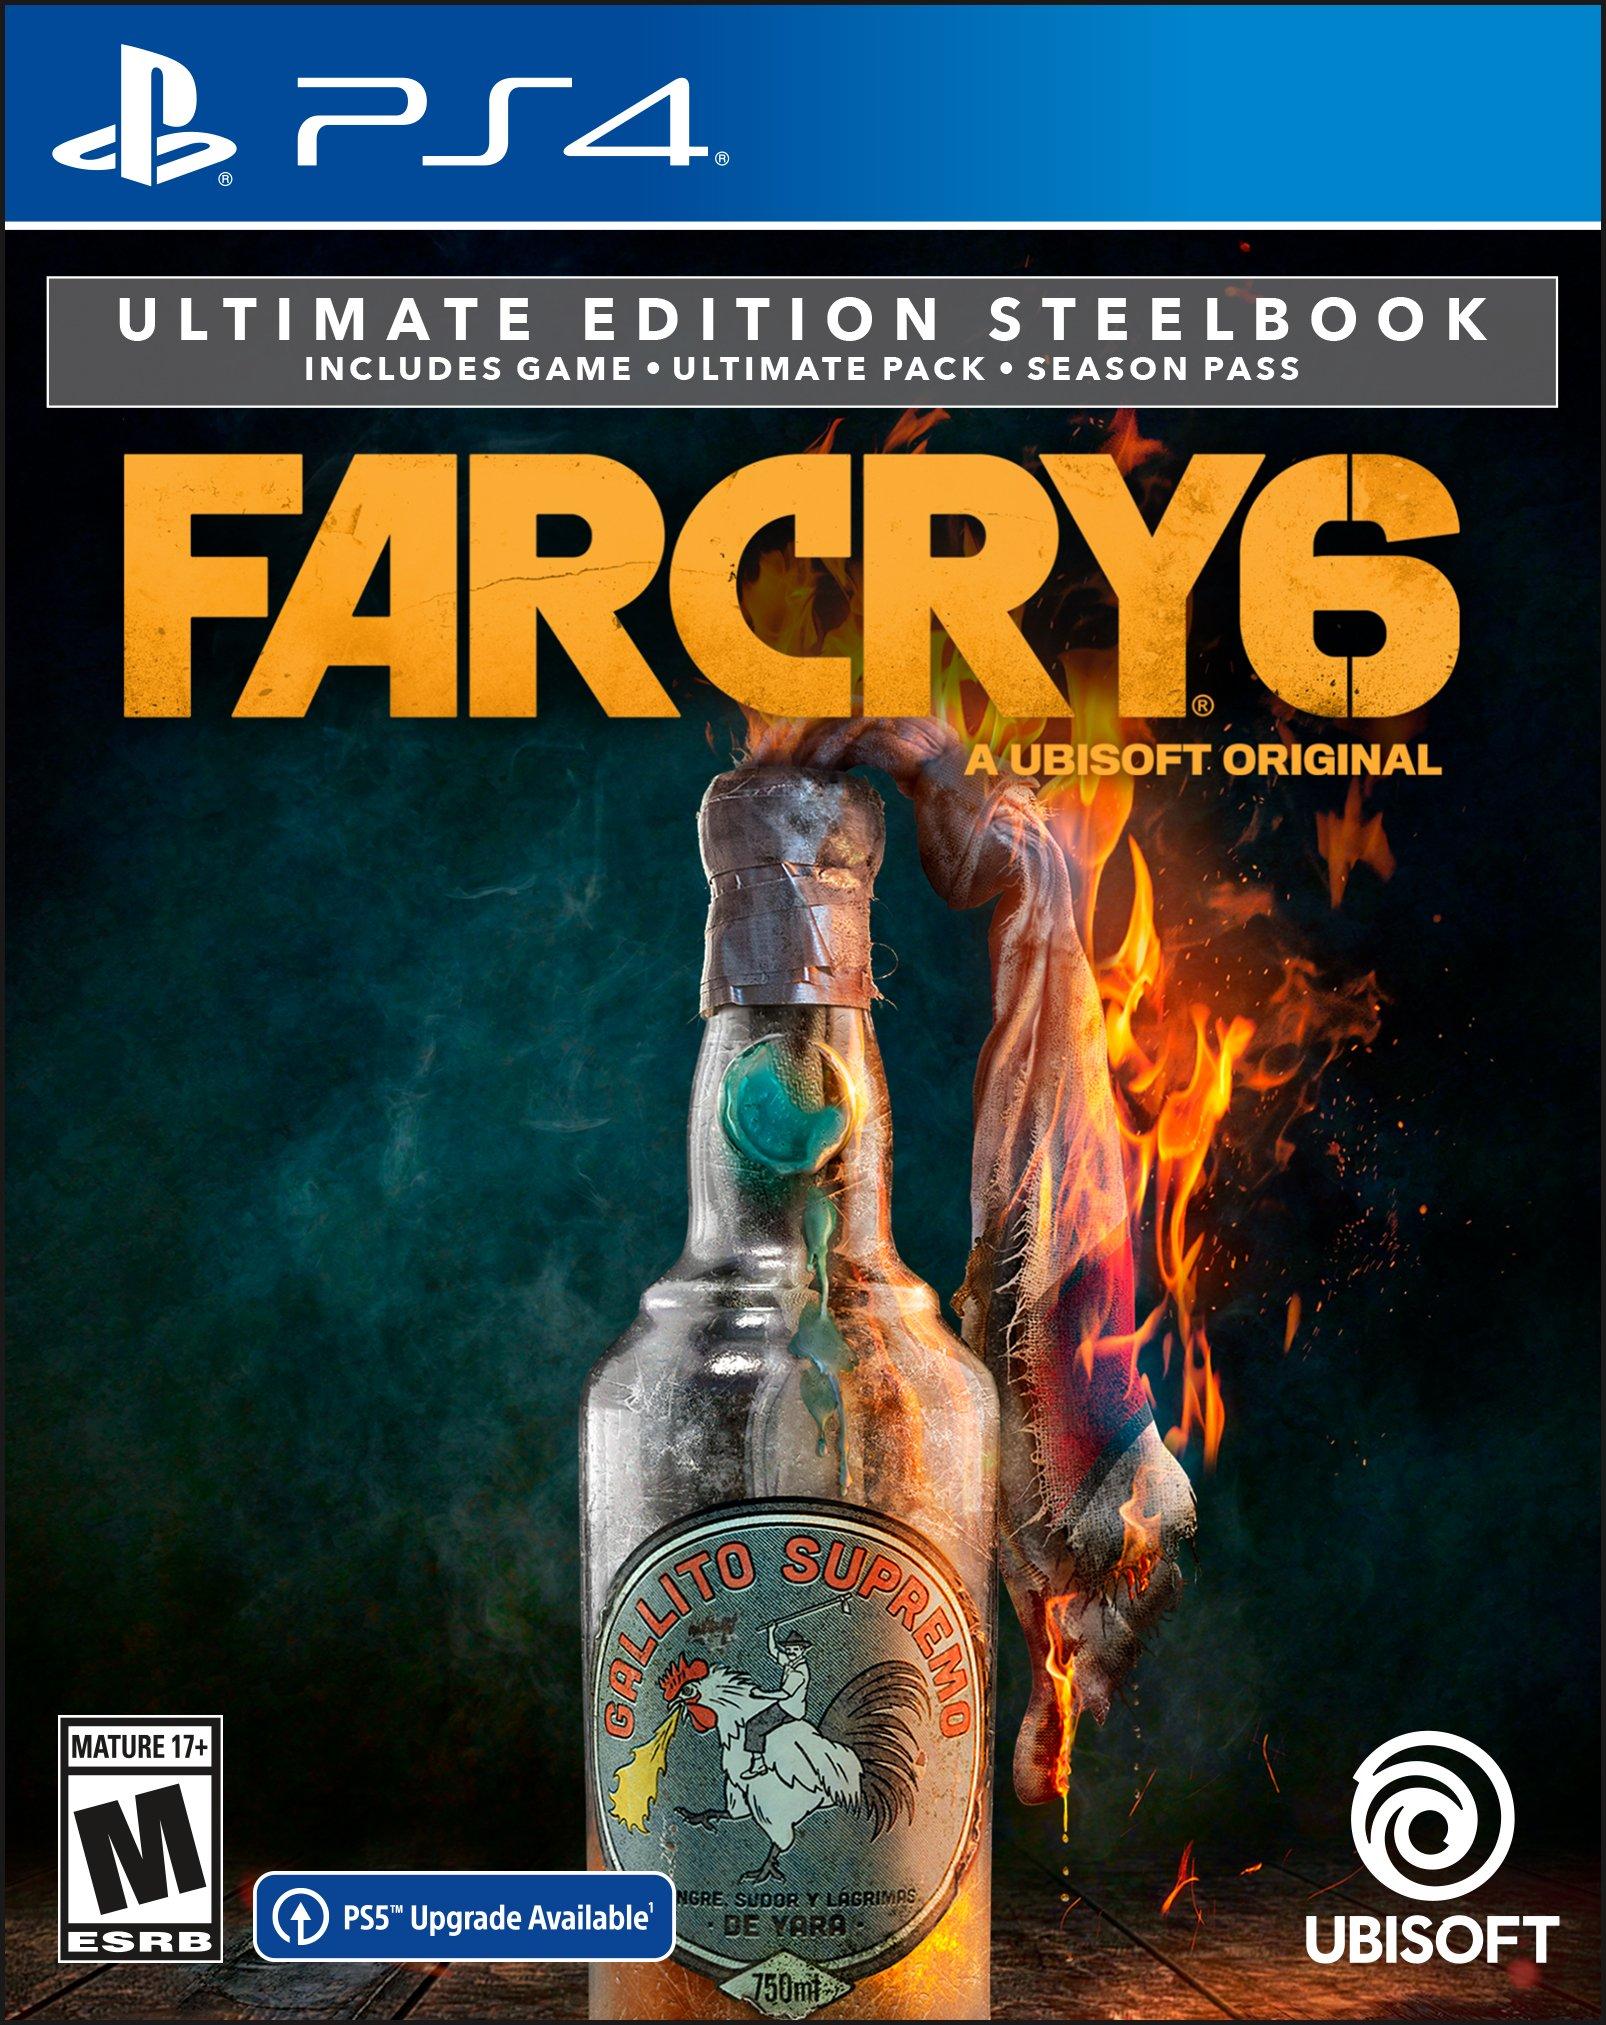 will far cry 6 be on ps4